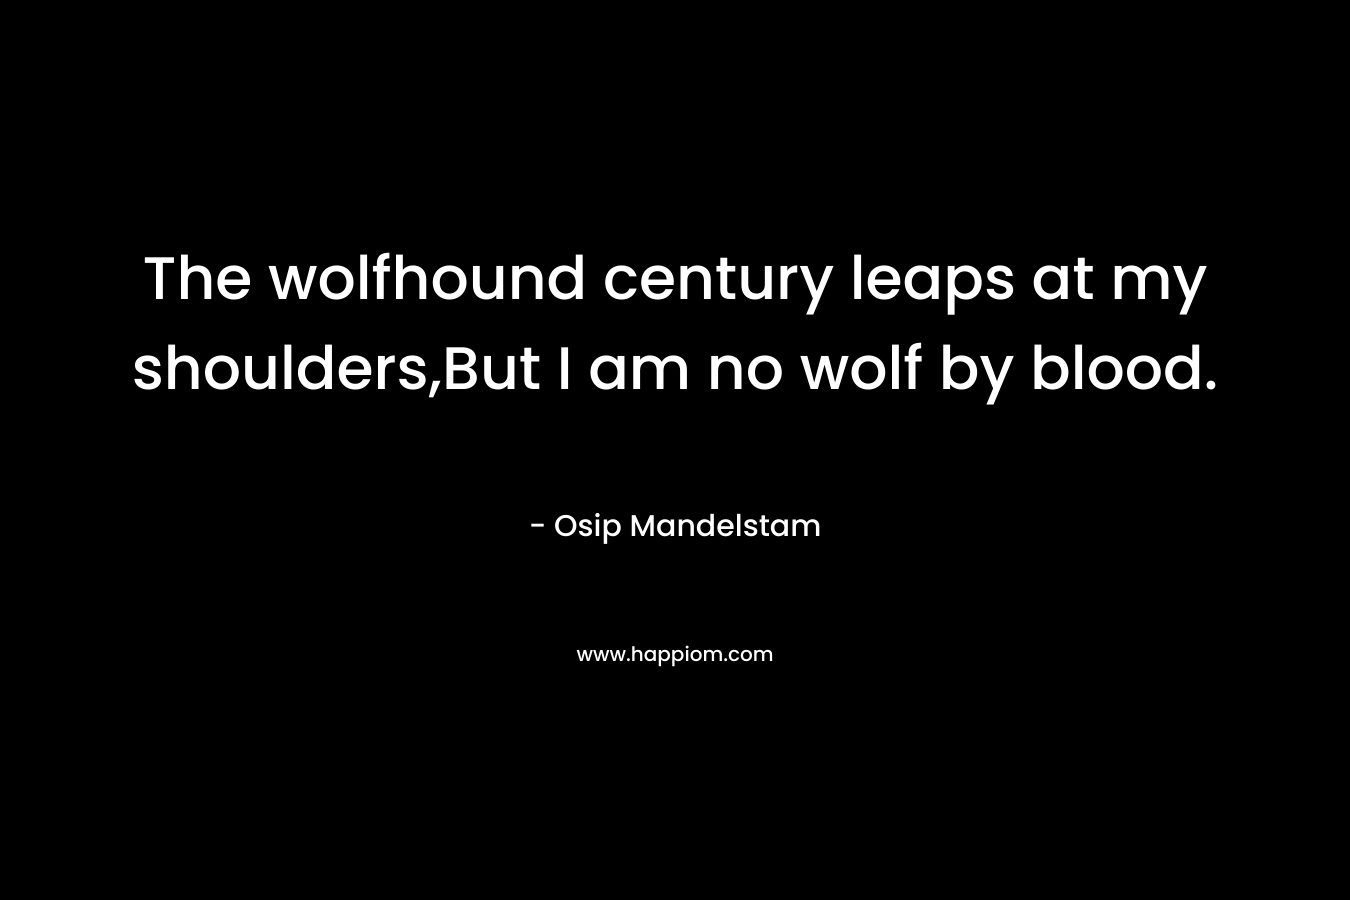 The wolfhound century leaps at my shoulders,But I am no wolf by blood.